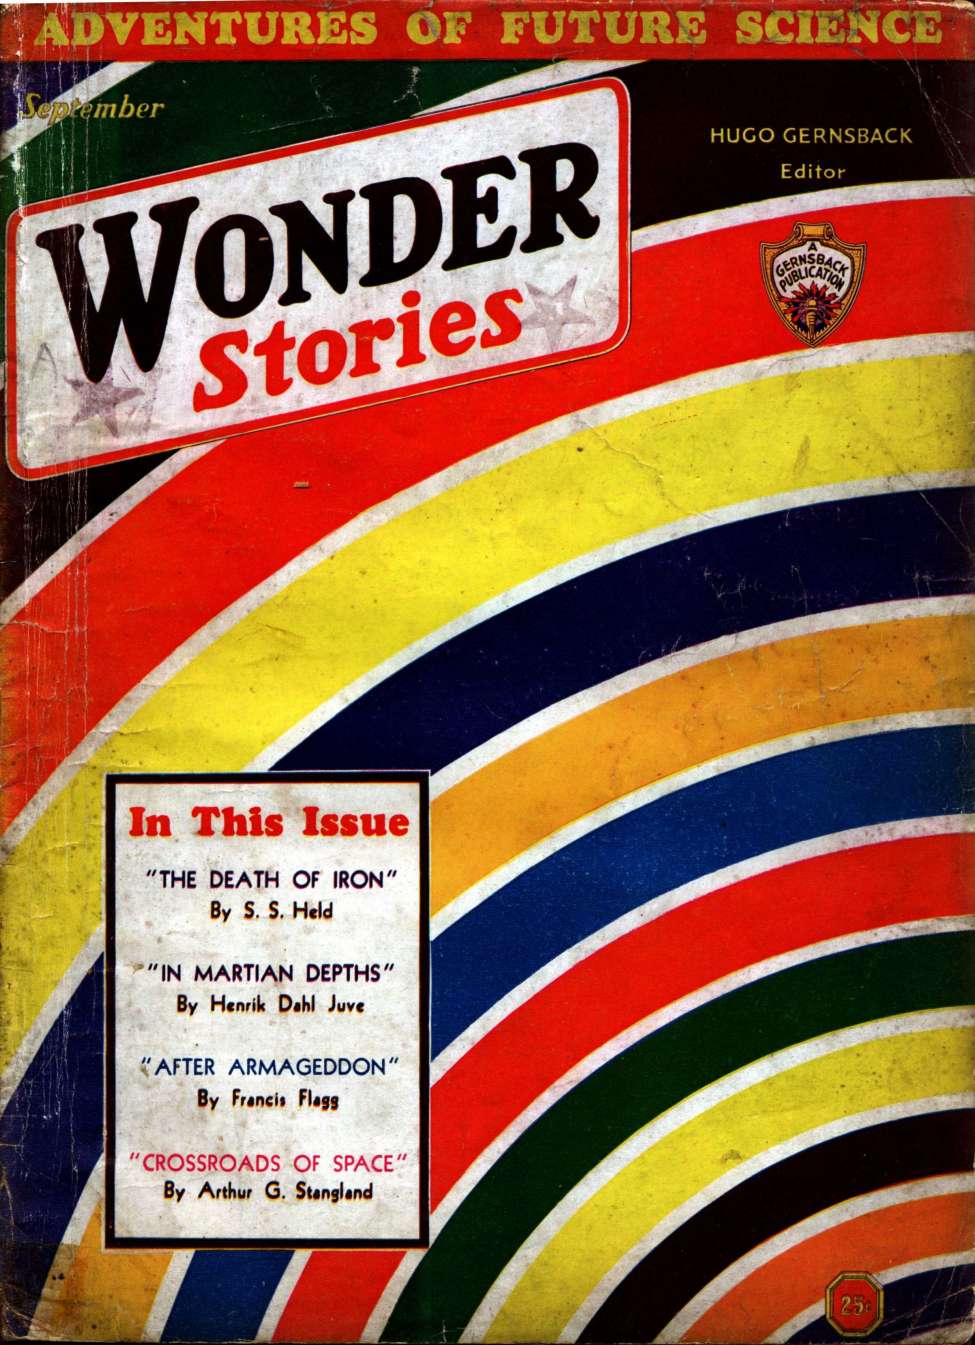 Comic Book Cover For Wonder Stories v4 4 - The Death of Iron - S. S. Held